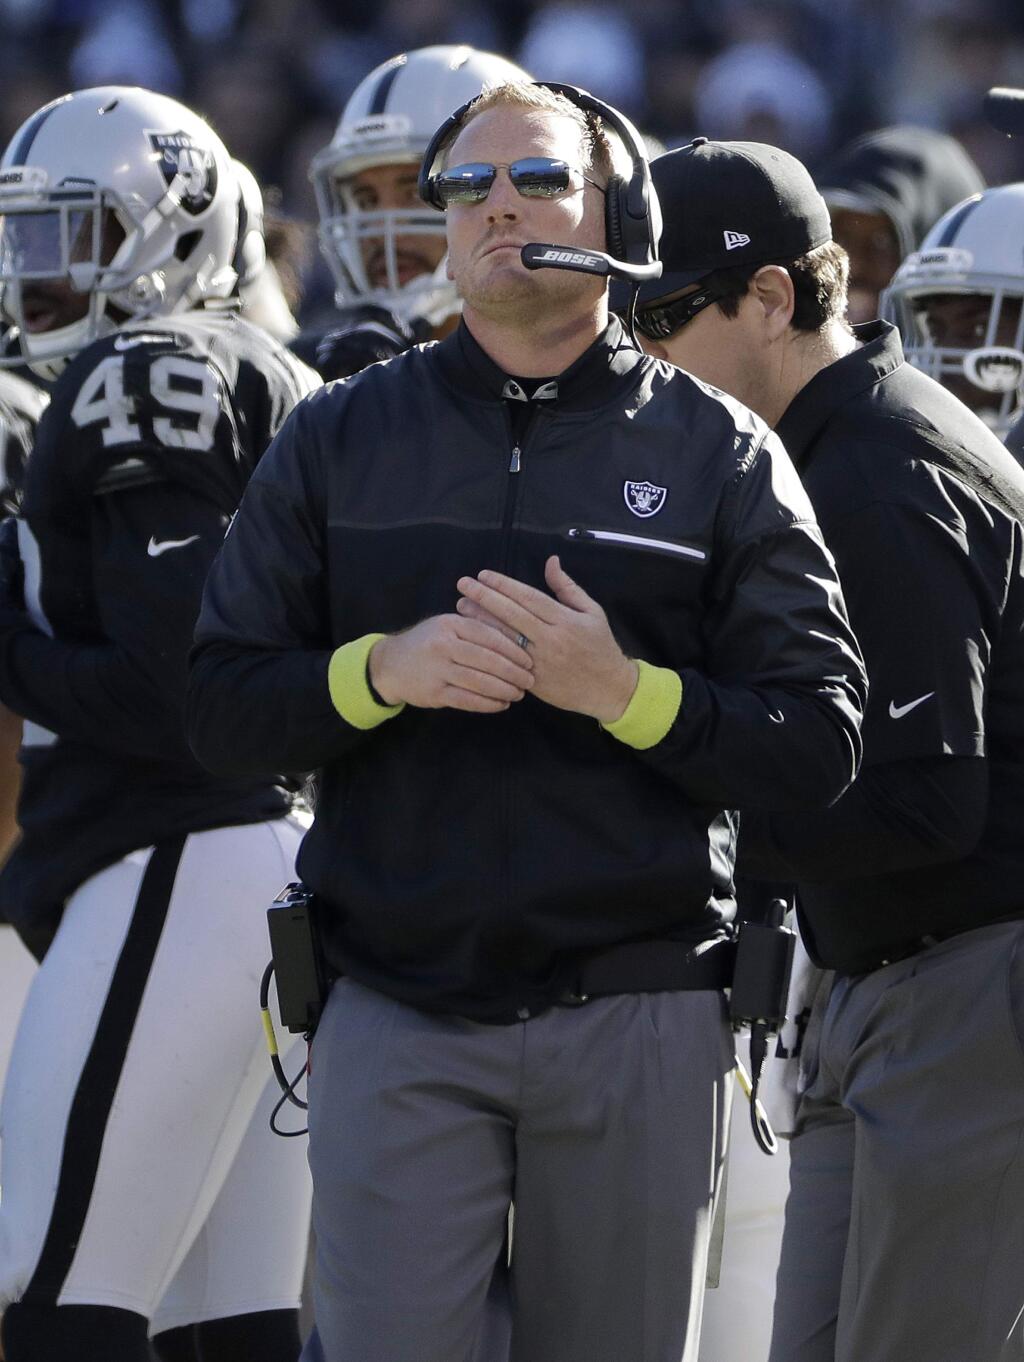 Oakland Raiders assistant coach Todd Downing during an NFL football game against the Indianapolis Colts in Oakland, Calif., Saturday, Dec. 24, 2016. (AP Photo/Marcio Jose Sanchez)